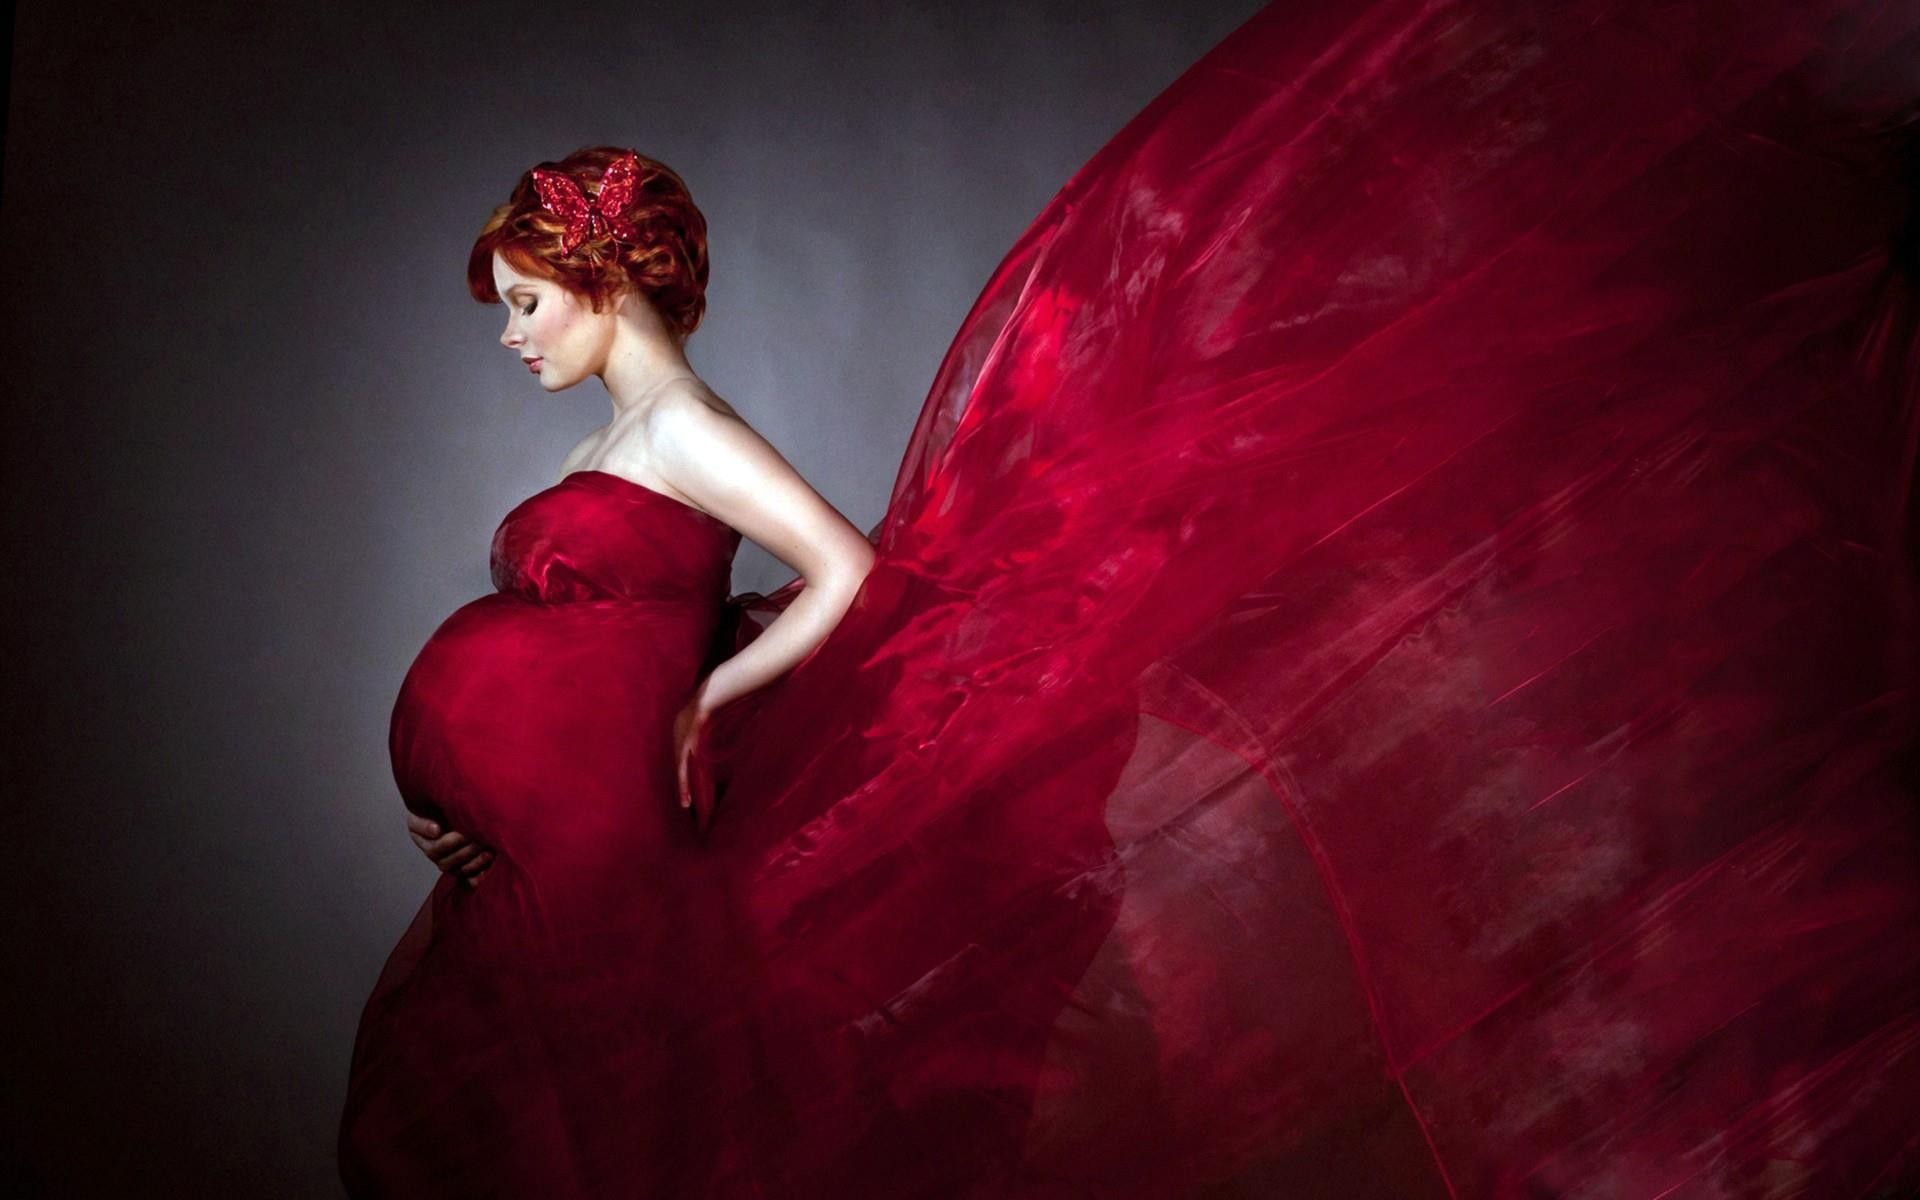 General 1920x1200 pregnant artwork butterfly profile dress pale women belly redhead red dress standing